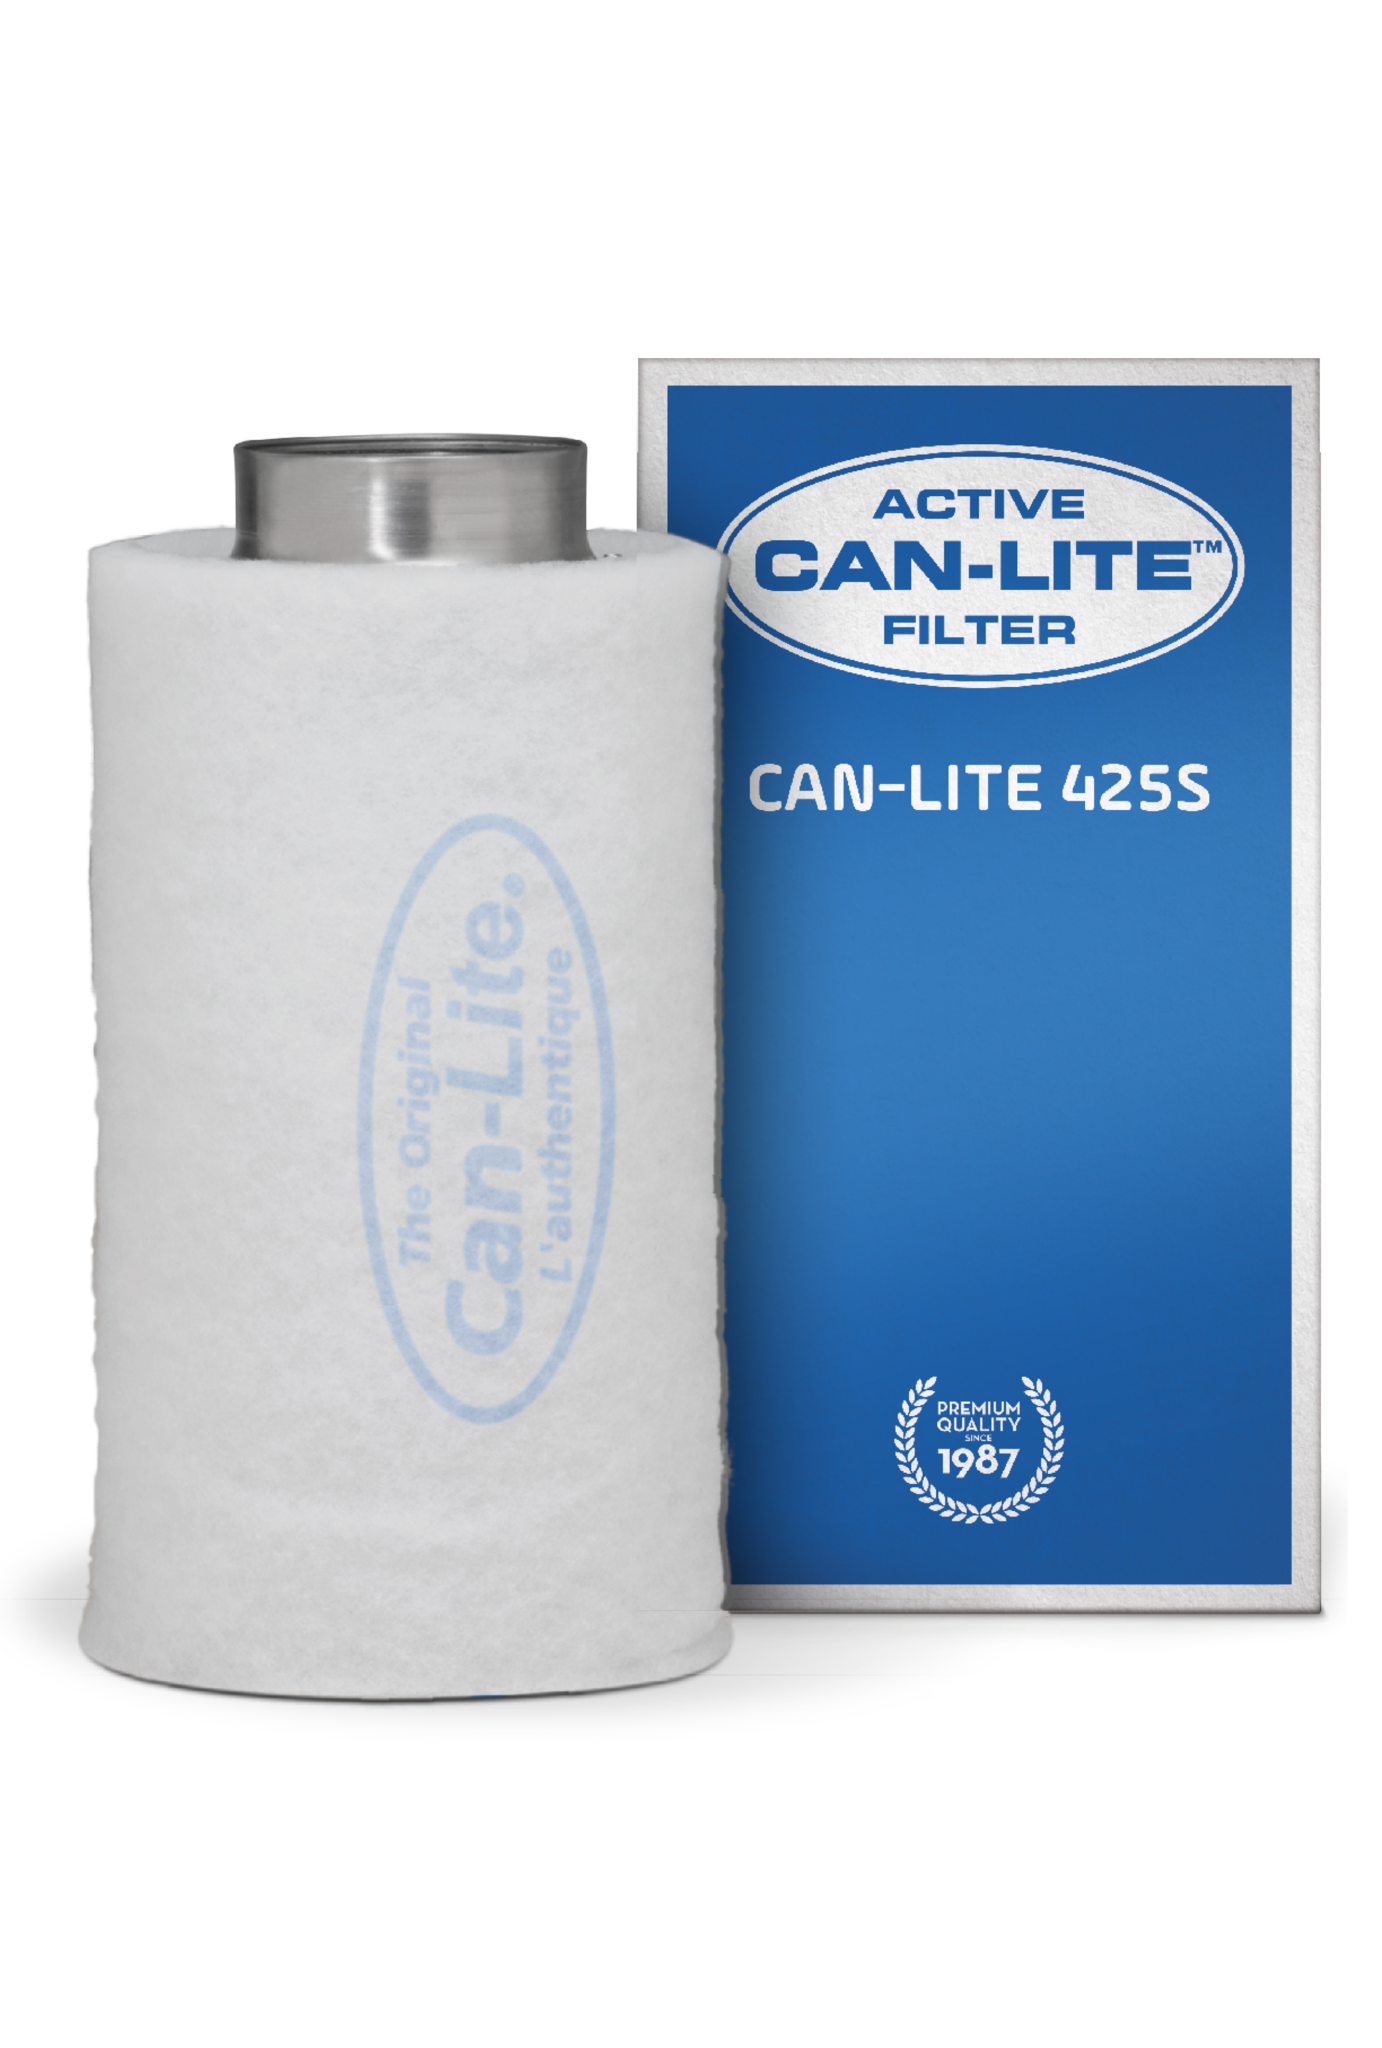 Can-lite